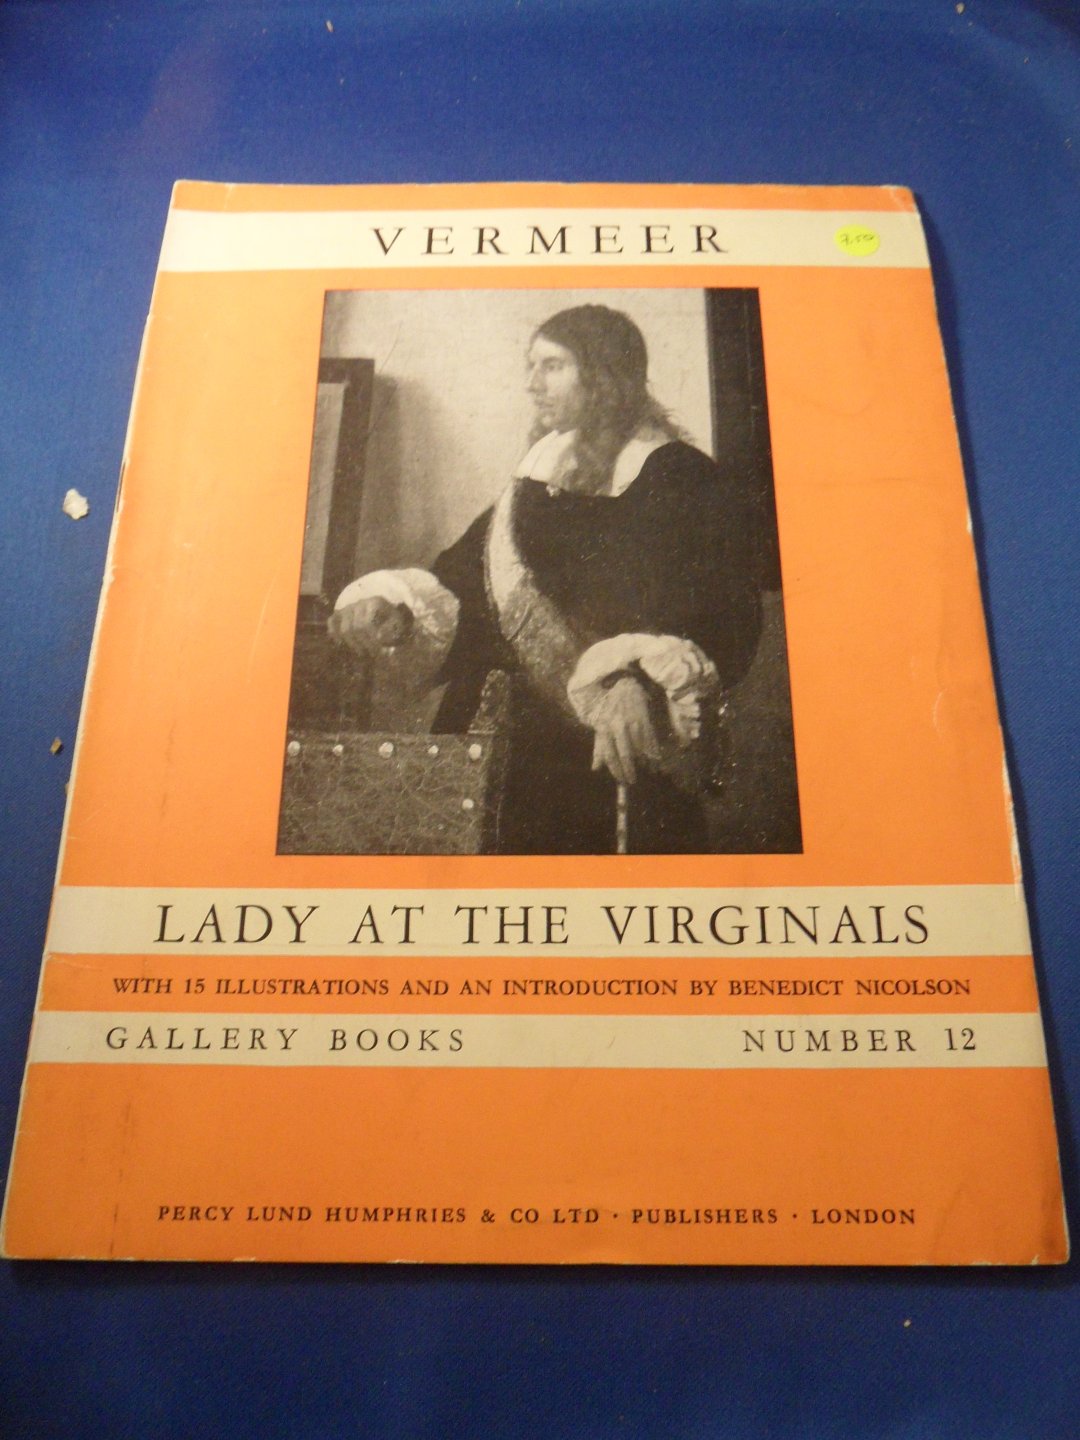 Nicolson, Benedict - Vermeer. Lady at the virginals . With 15 illustrations